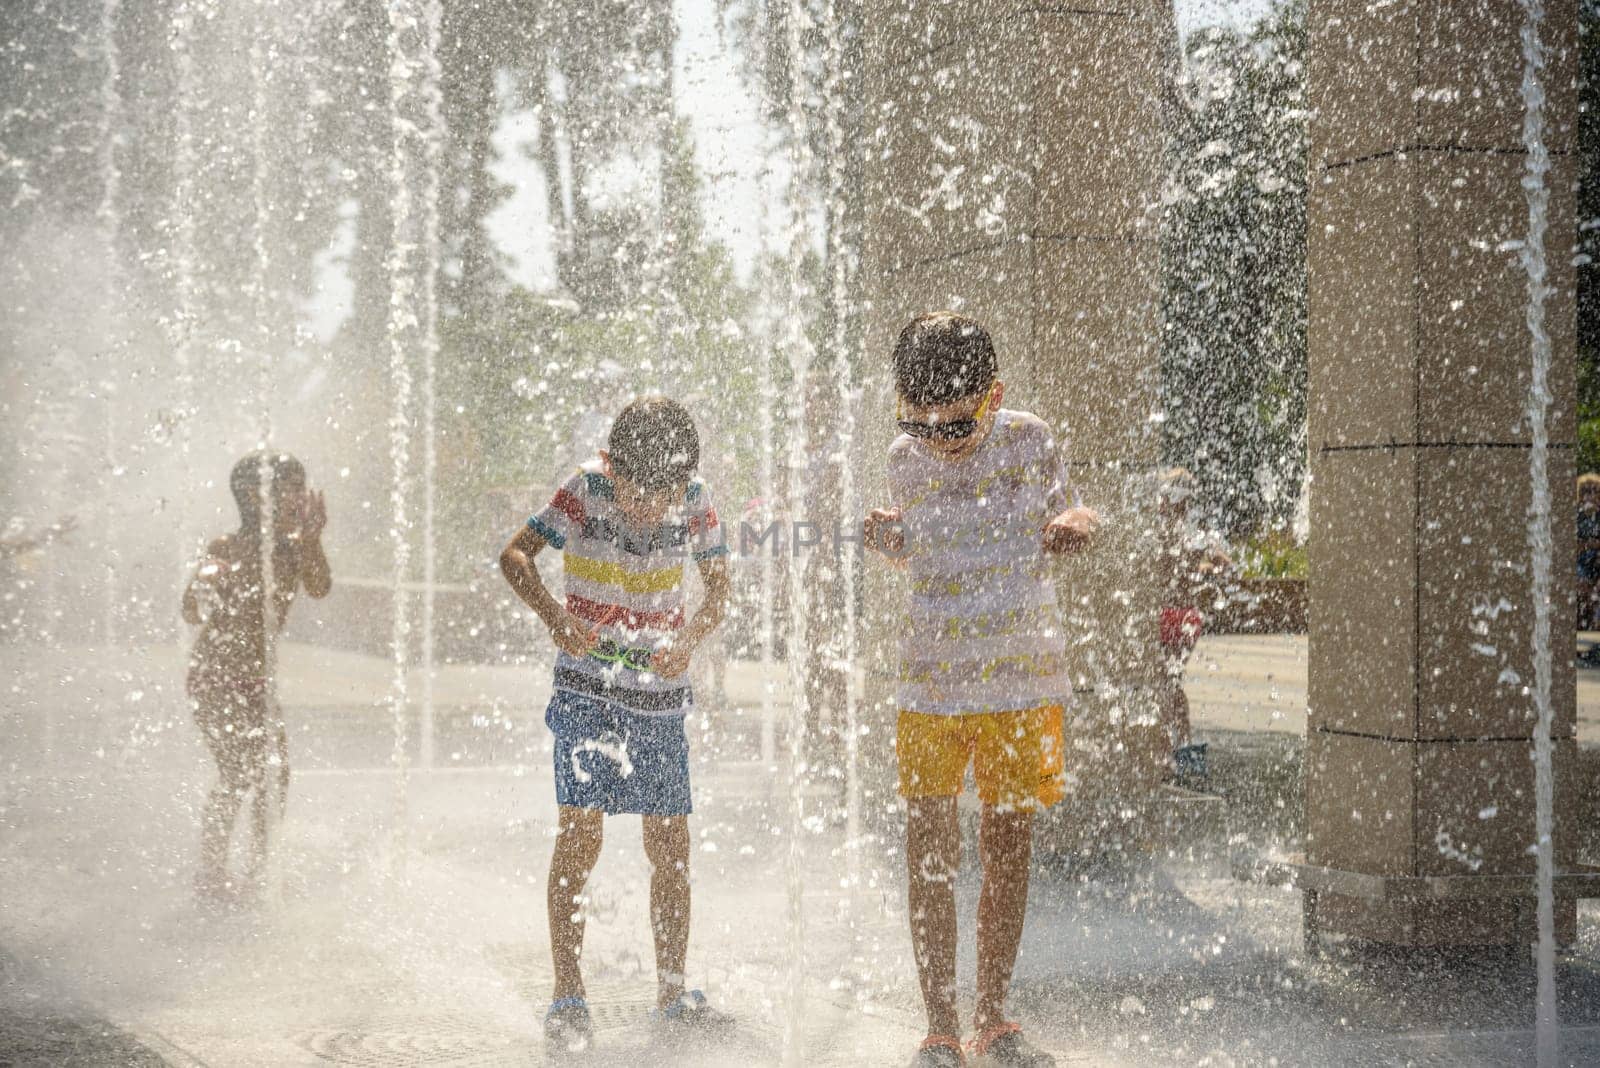 Boy having fun in water fountains. Child playing with a city fountain on hot summer day. Happy kids having fun in fountain. Summer weather. Active leisure, lifestyle and vacation.